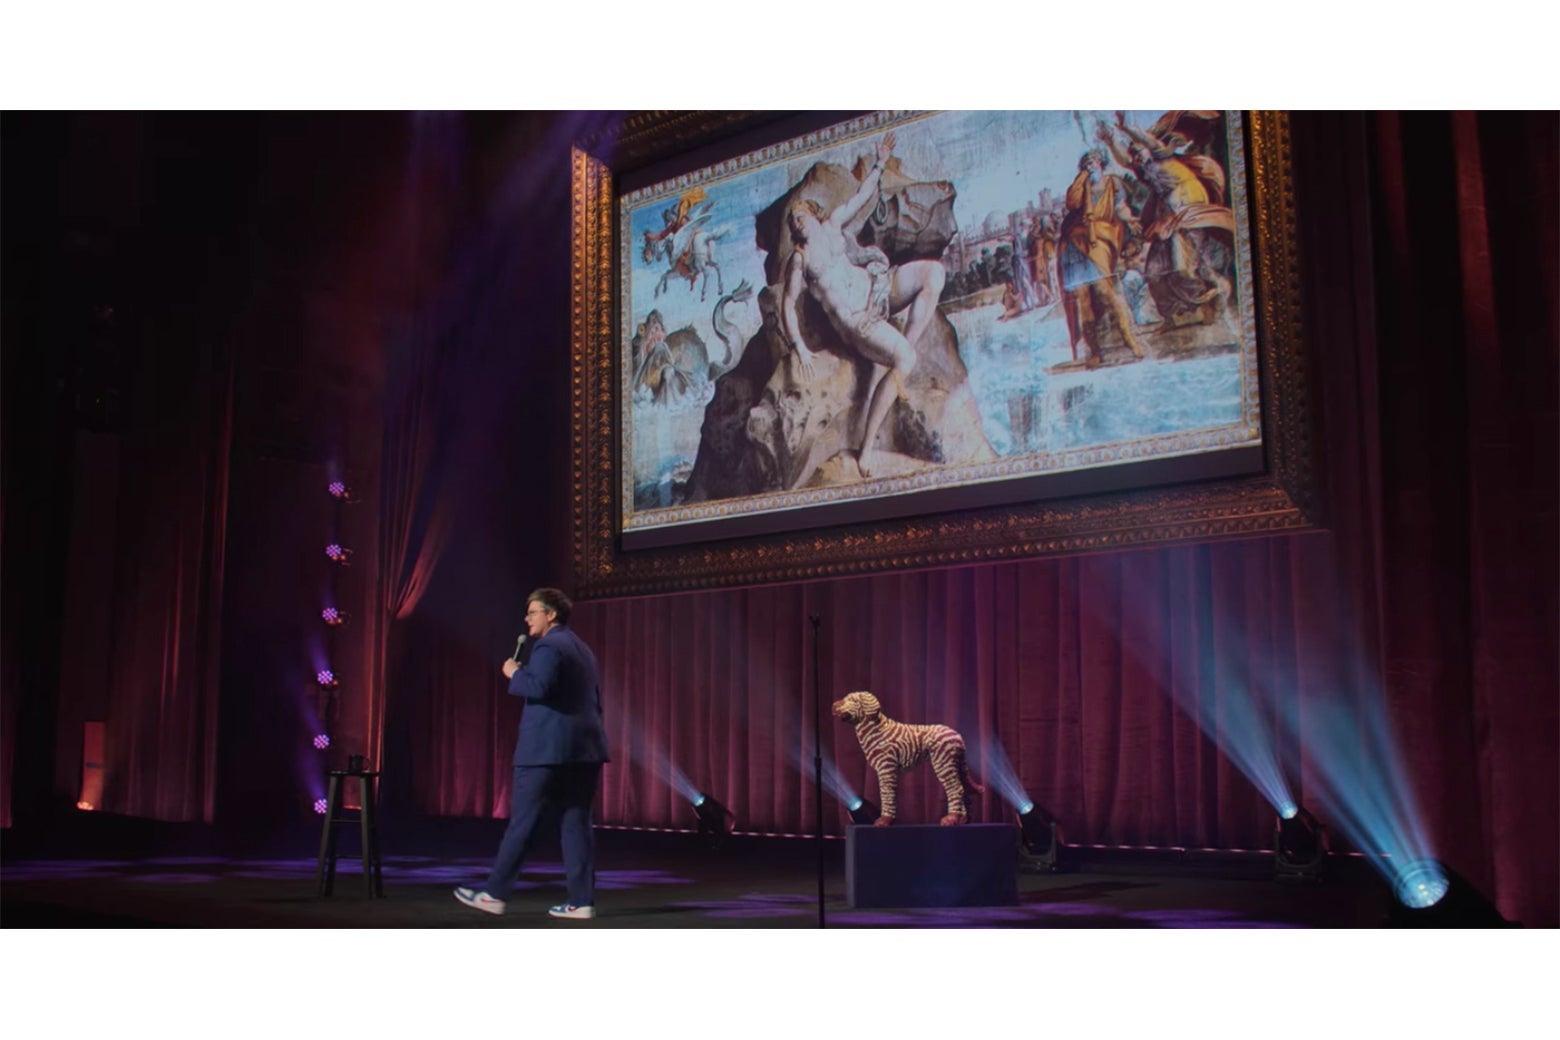 Hannah Gadsby stands in front of a projection screen displaying a fresco of Andromeda chained to her rock.